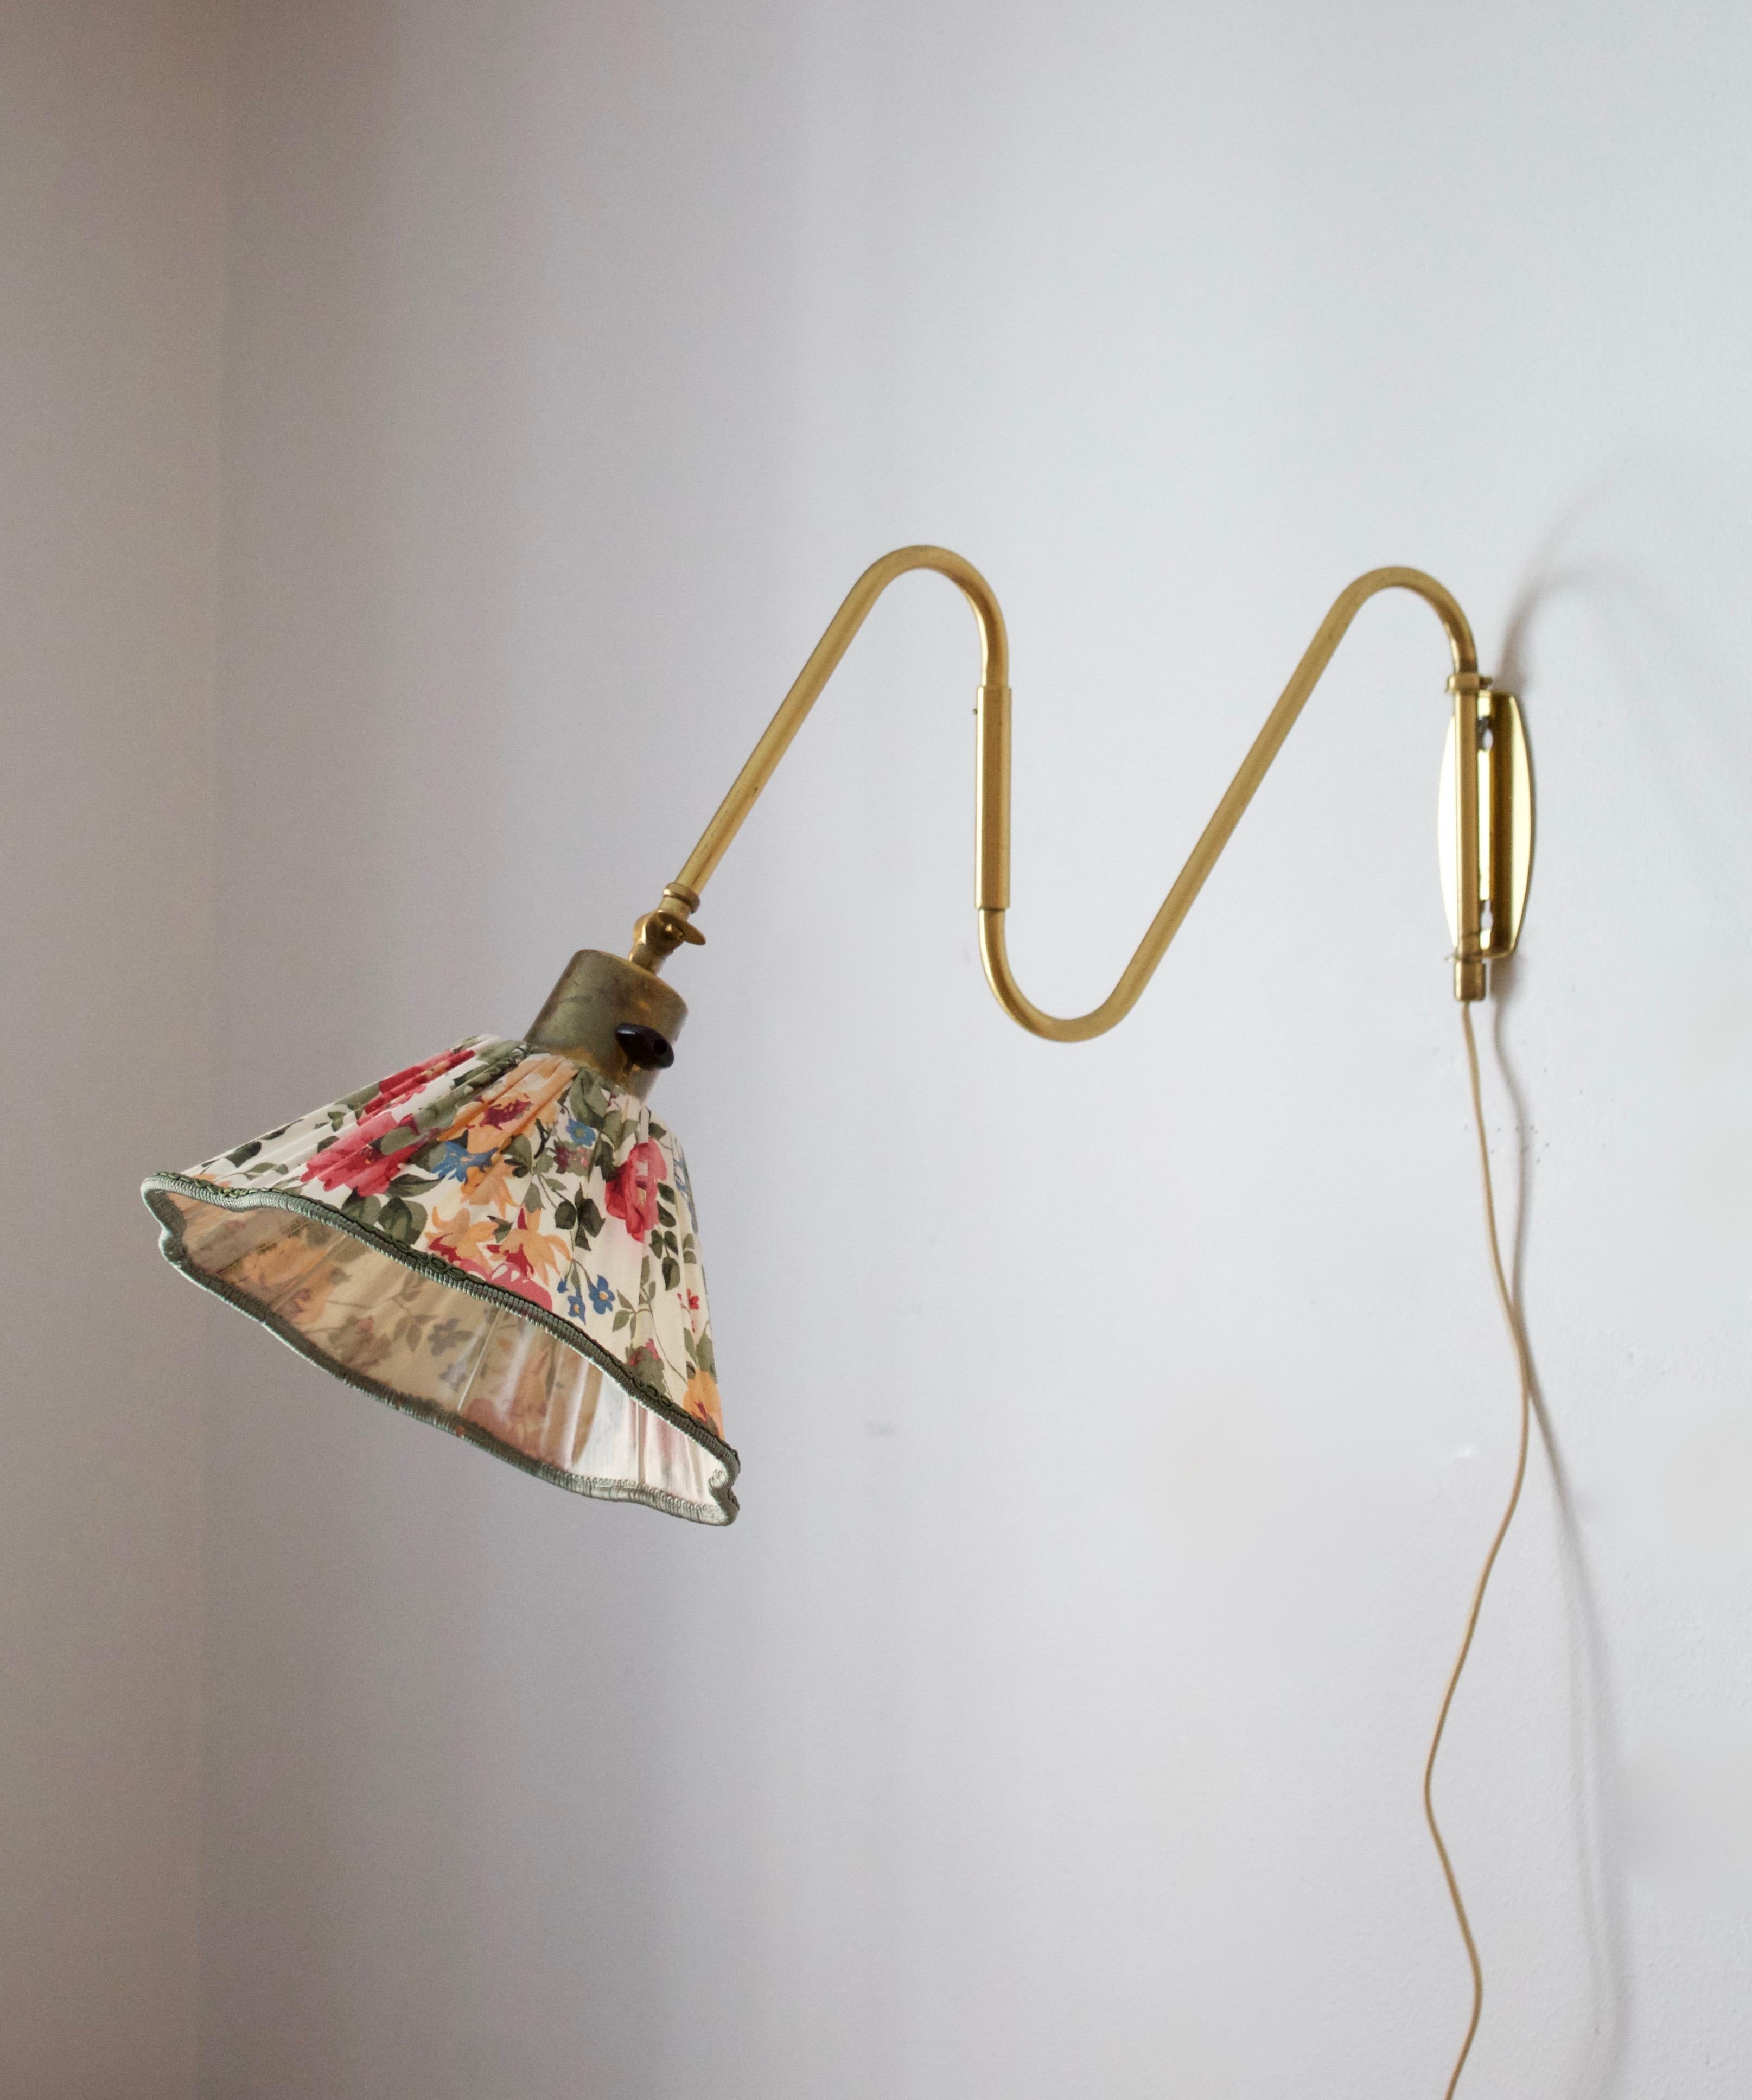 A functionalist wall light / task light, designed and produced in Sweden, 1940s-1950s. Vintage floral print lampshade.

Stated dimensions with lampshade attached. Measurements variable.